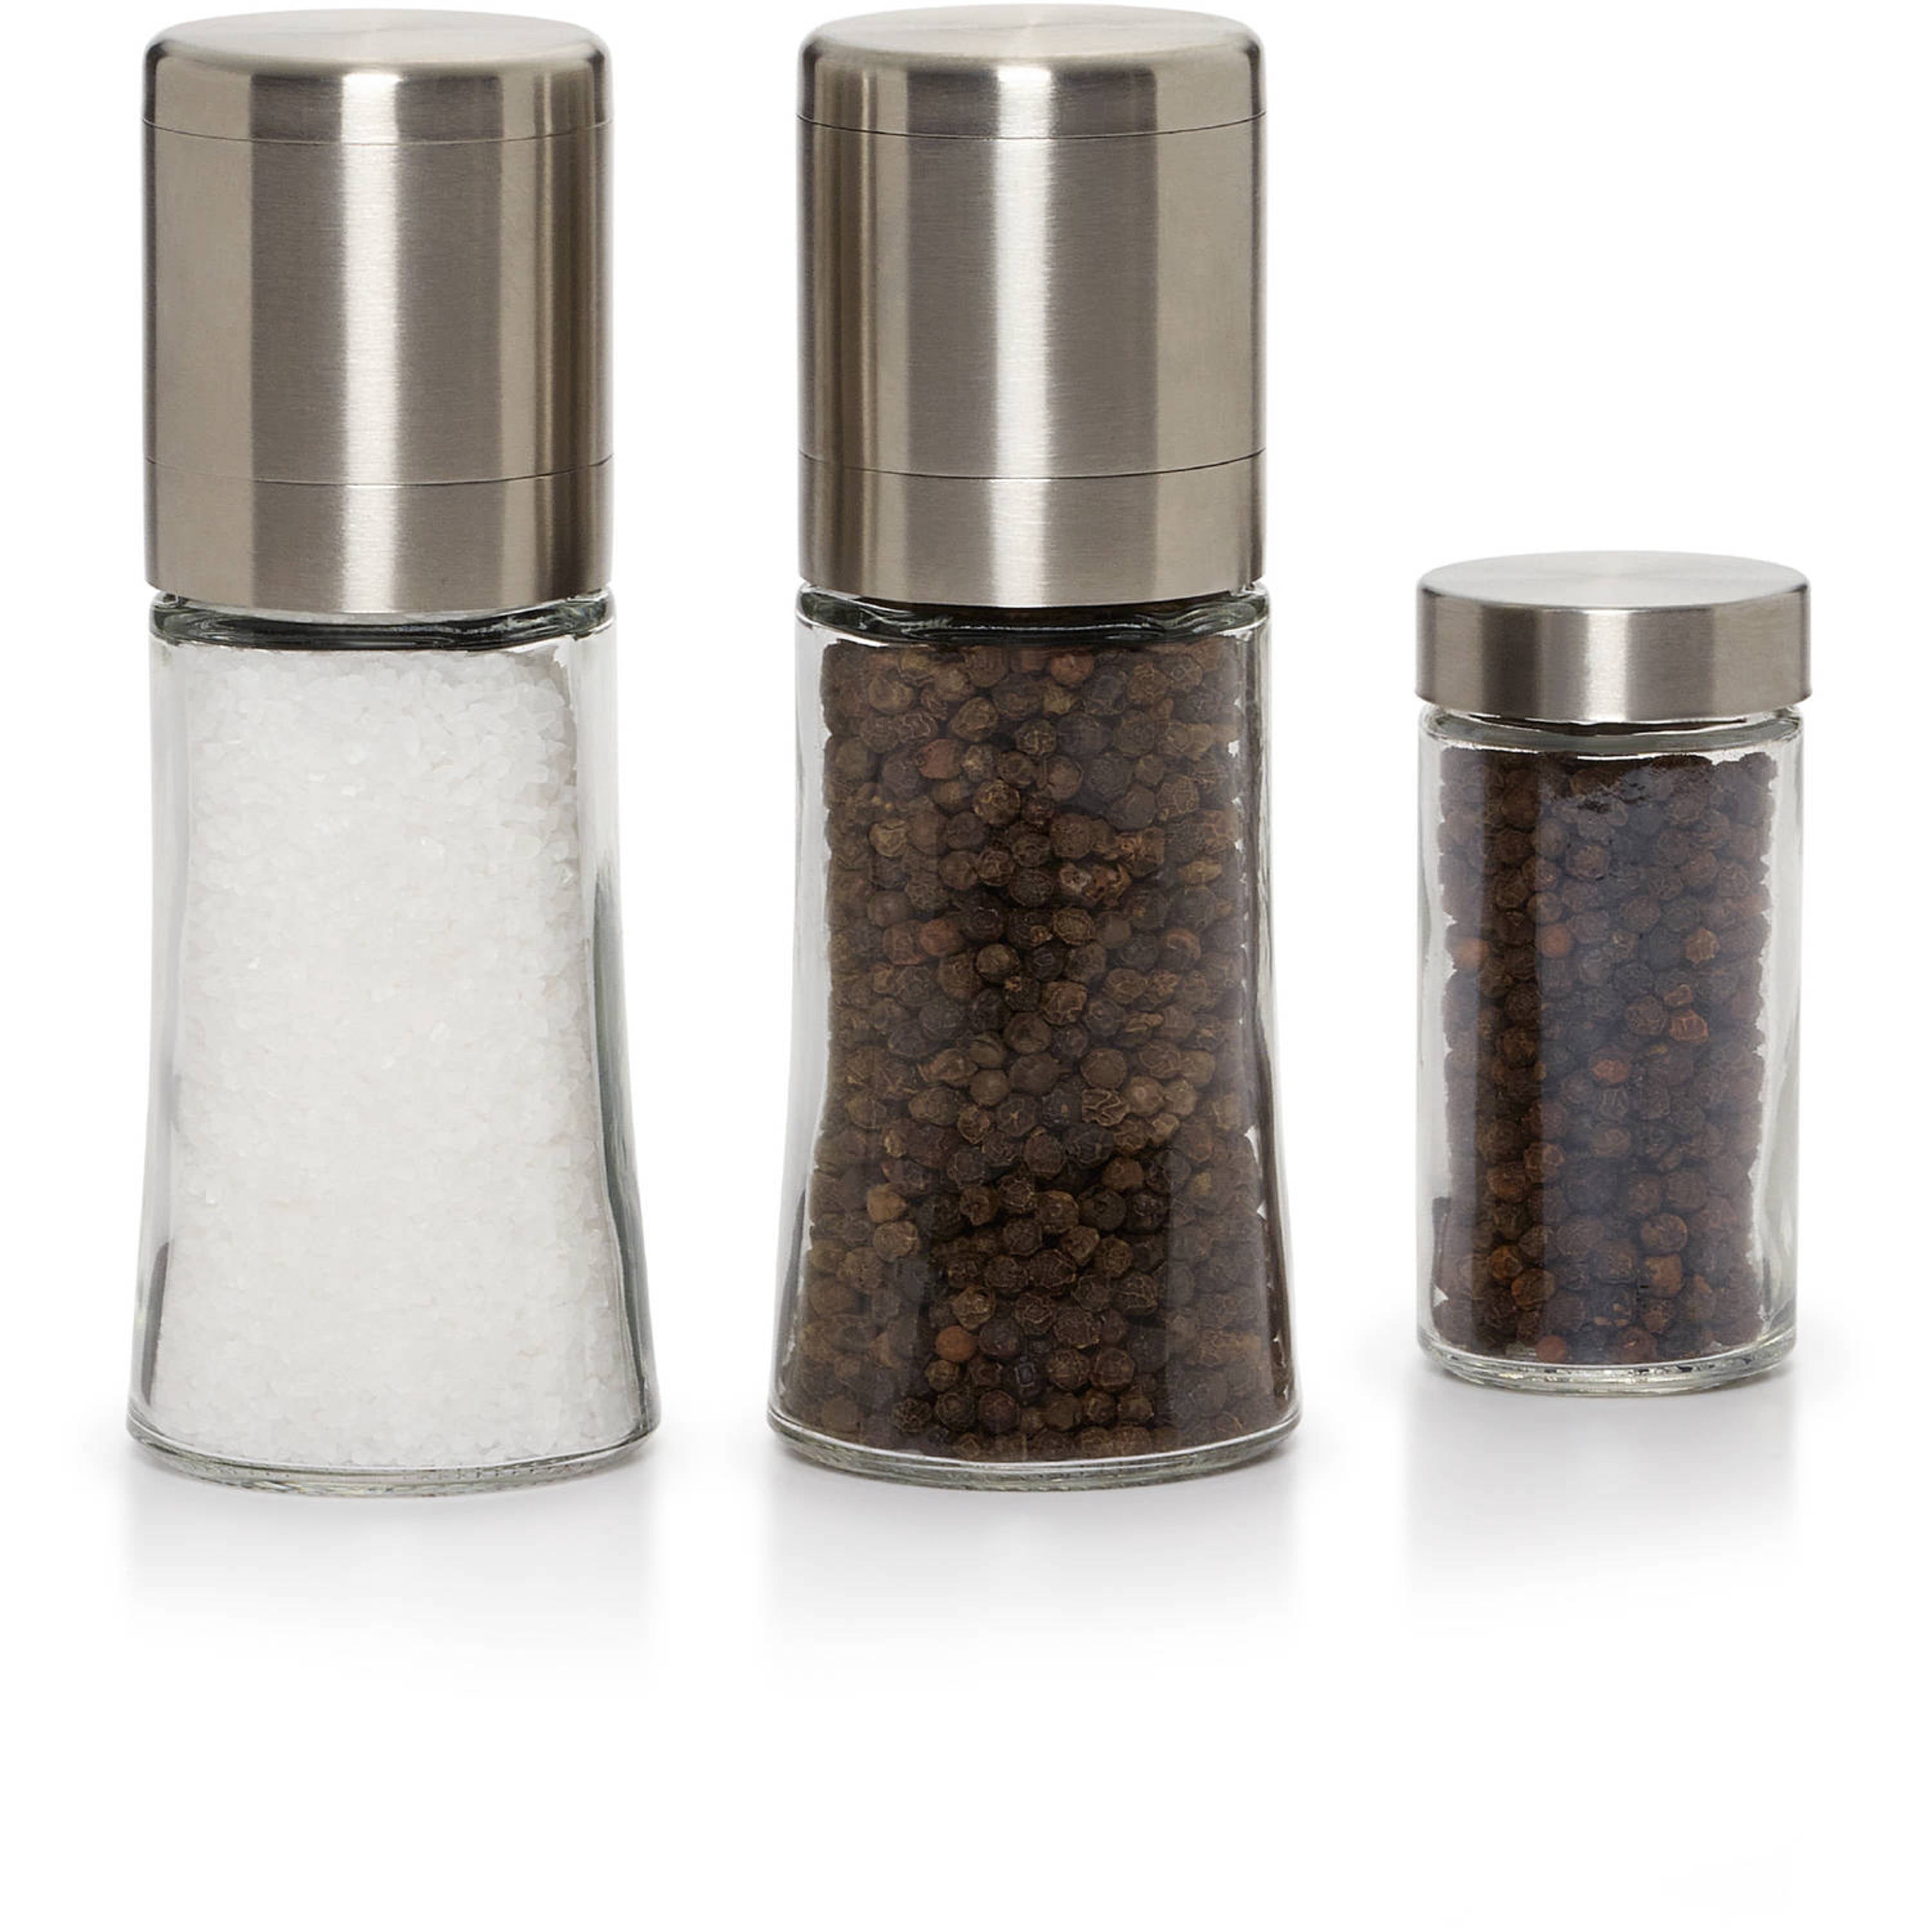 Antrepo'S D Battery Salt and Pepper Shakers Generate Zero-Point